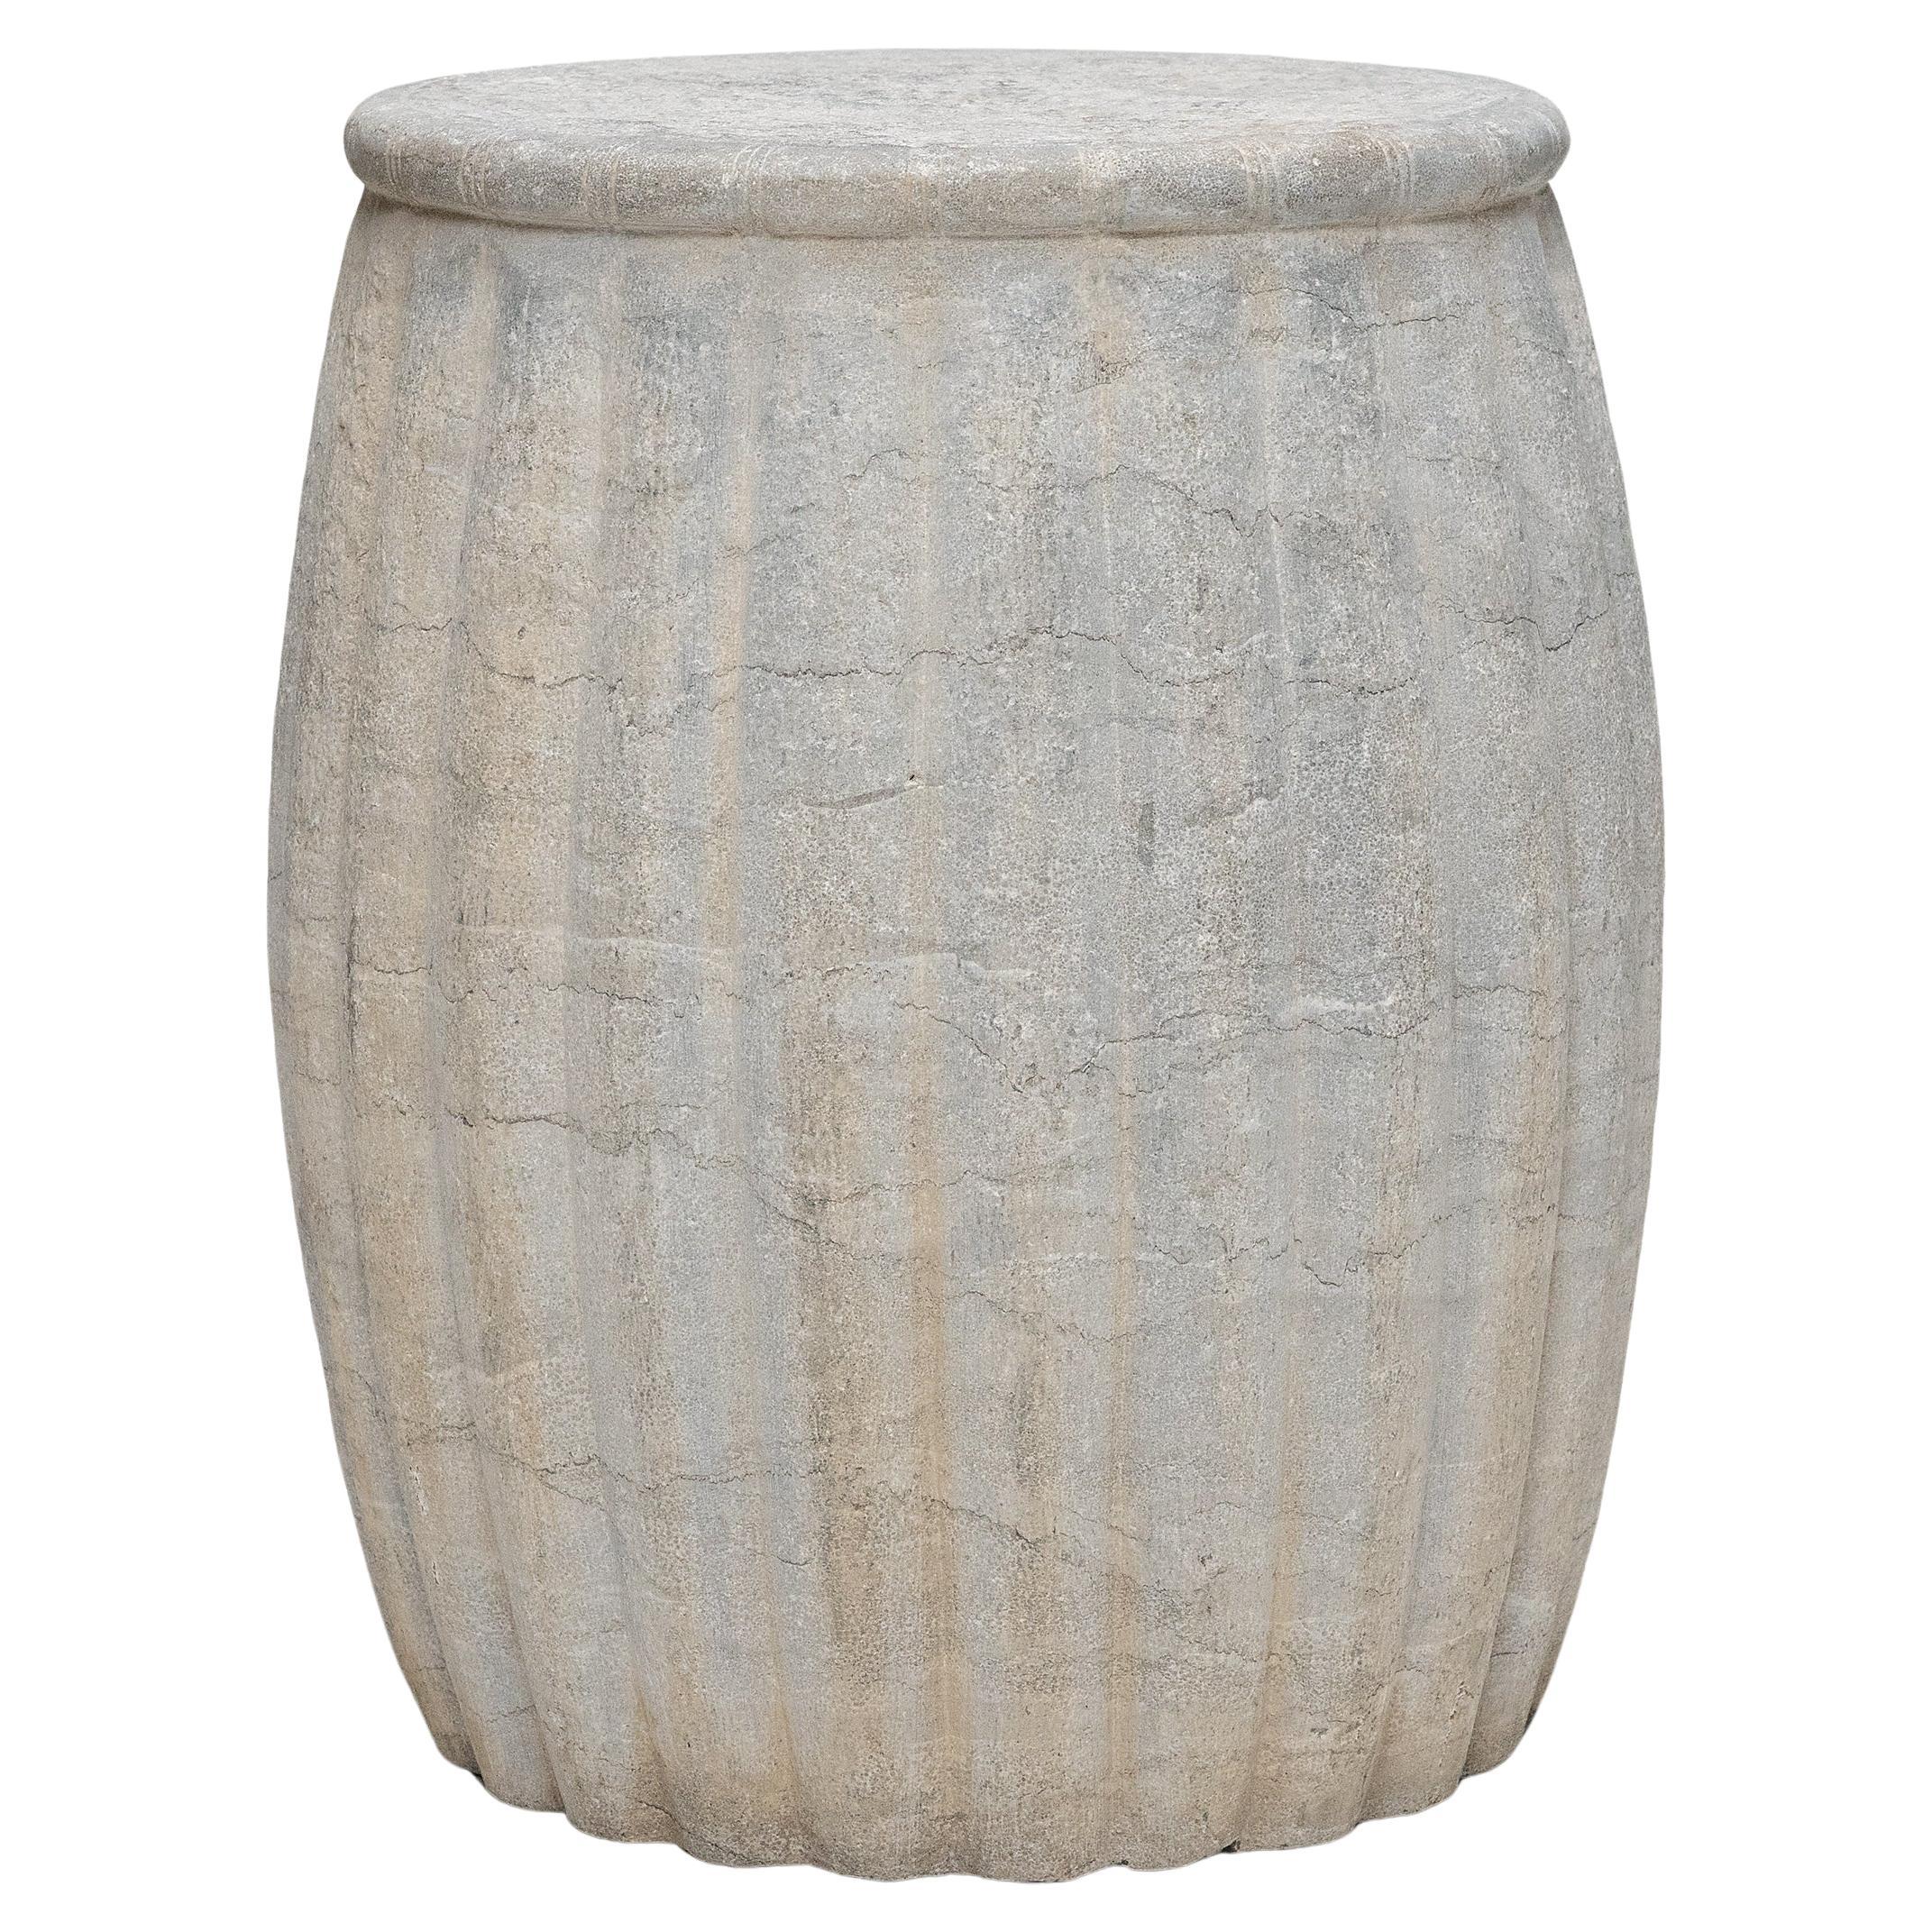 Drum-form stools such as these were traditionally used in gardens and outdoor pavilions where upper class scholars read, wrote, gathered for discussion and, in general, developed their inner sensibilities. This contemporary example is carved from